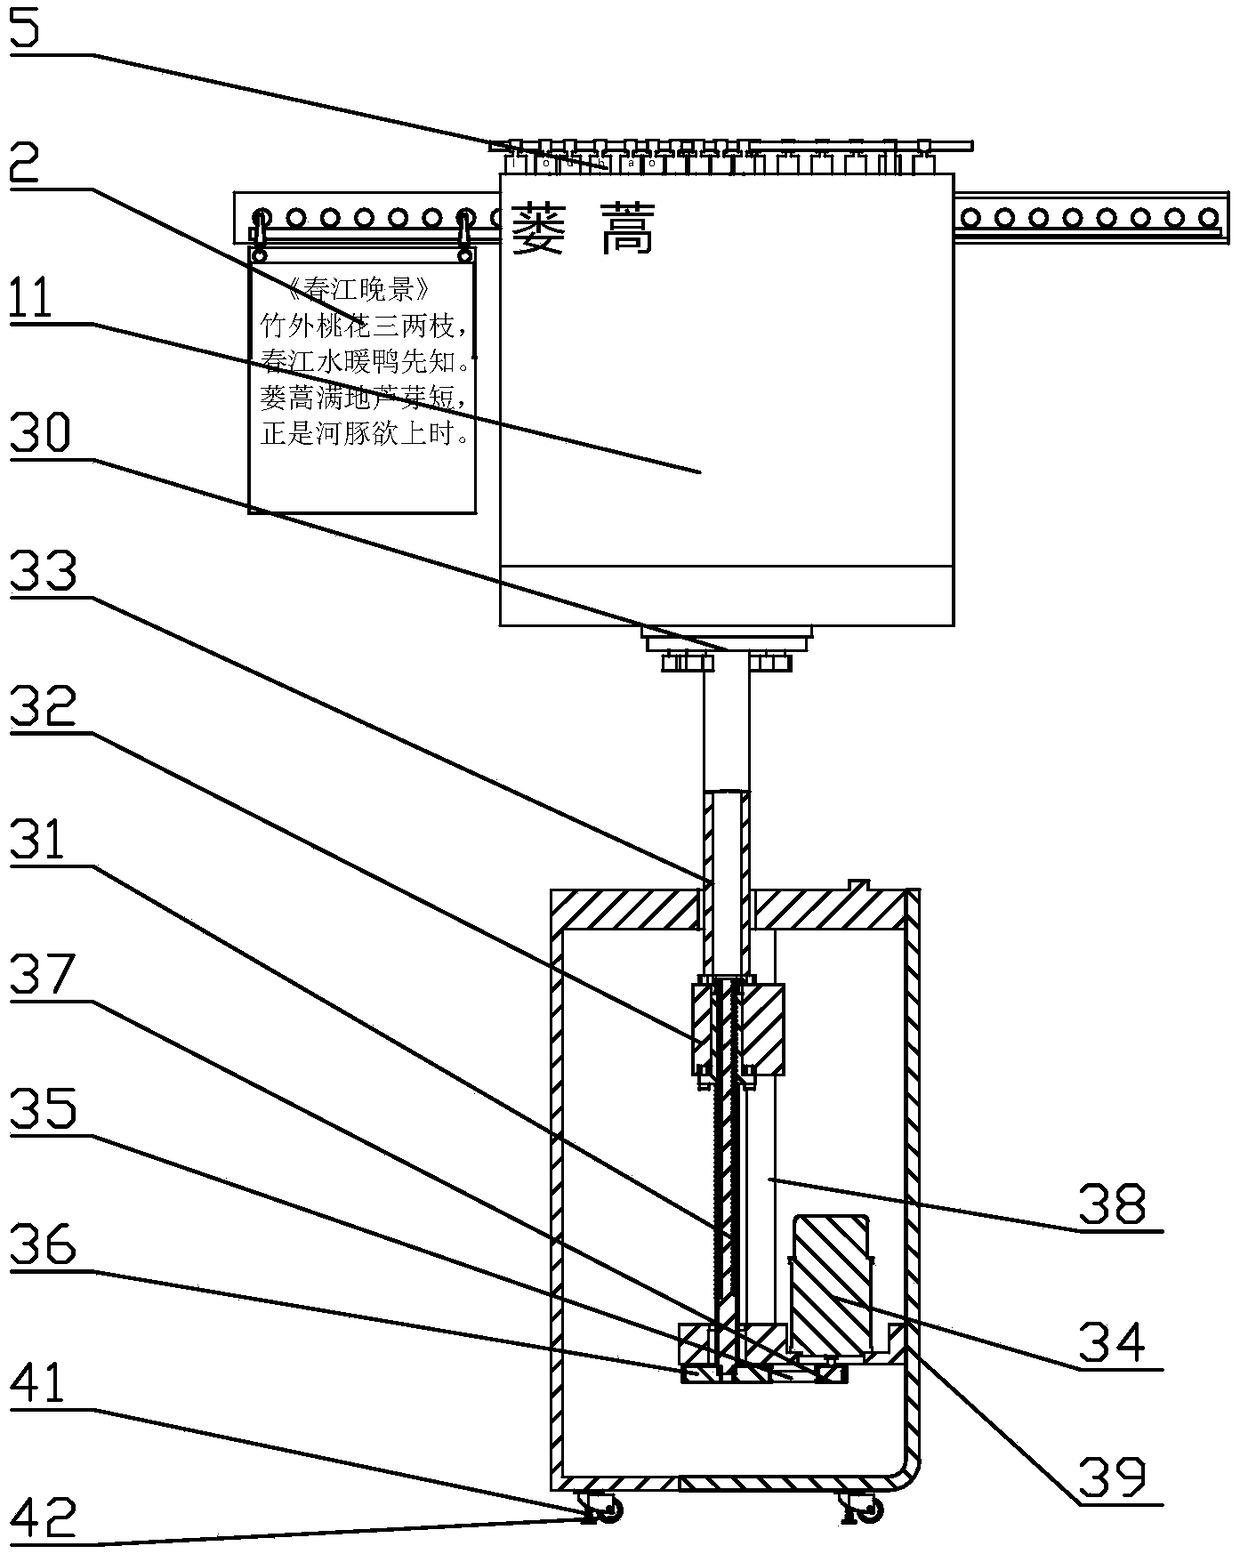 Display device for Chinese character phonetic teaching